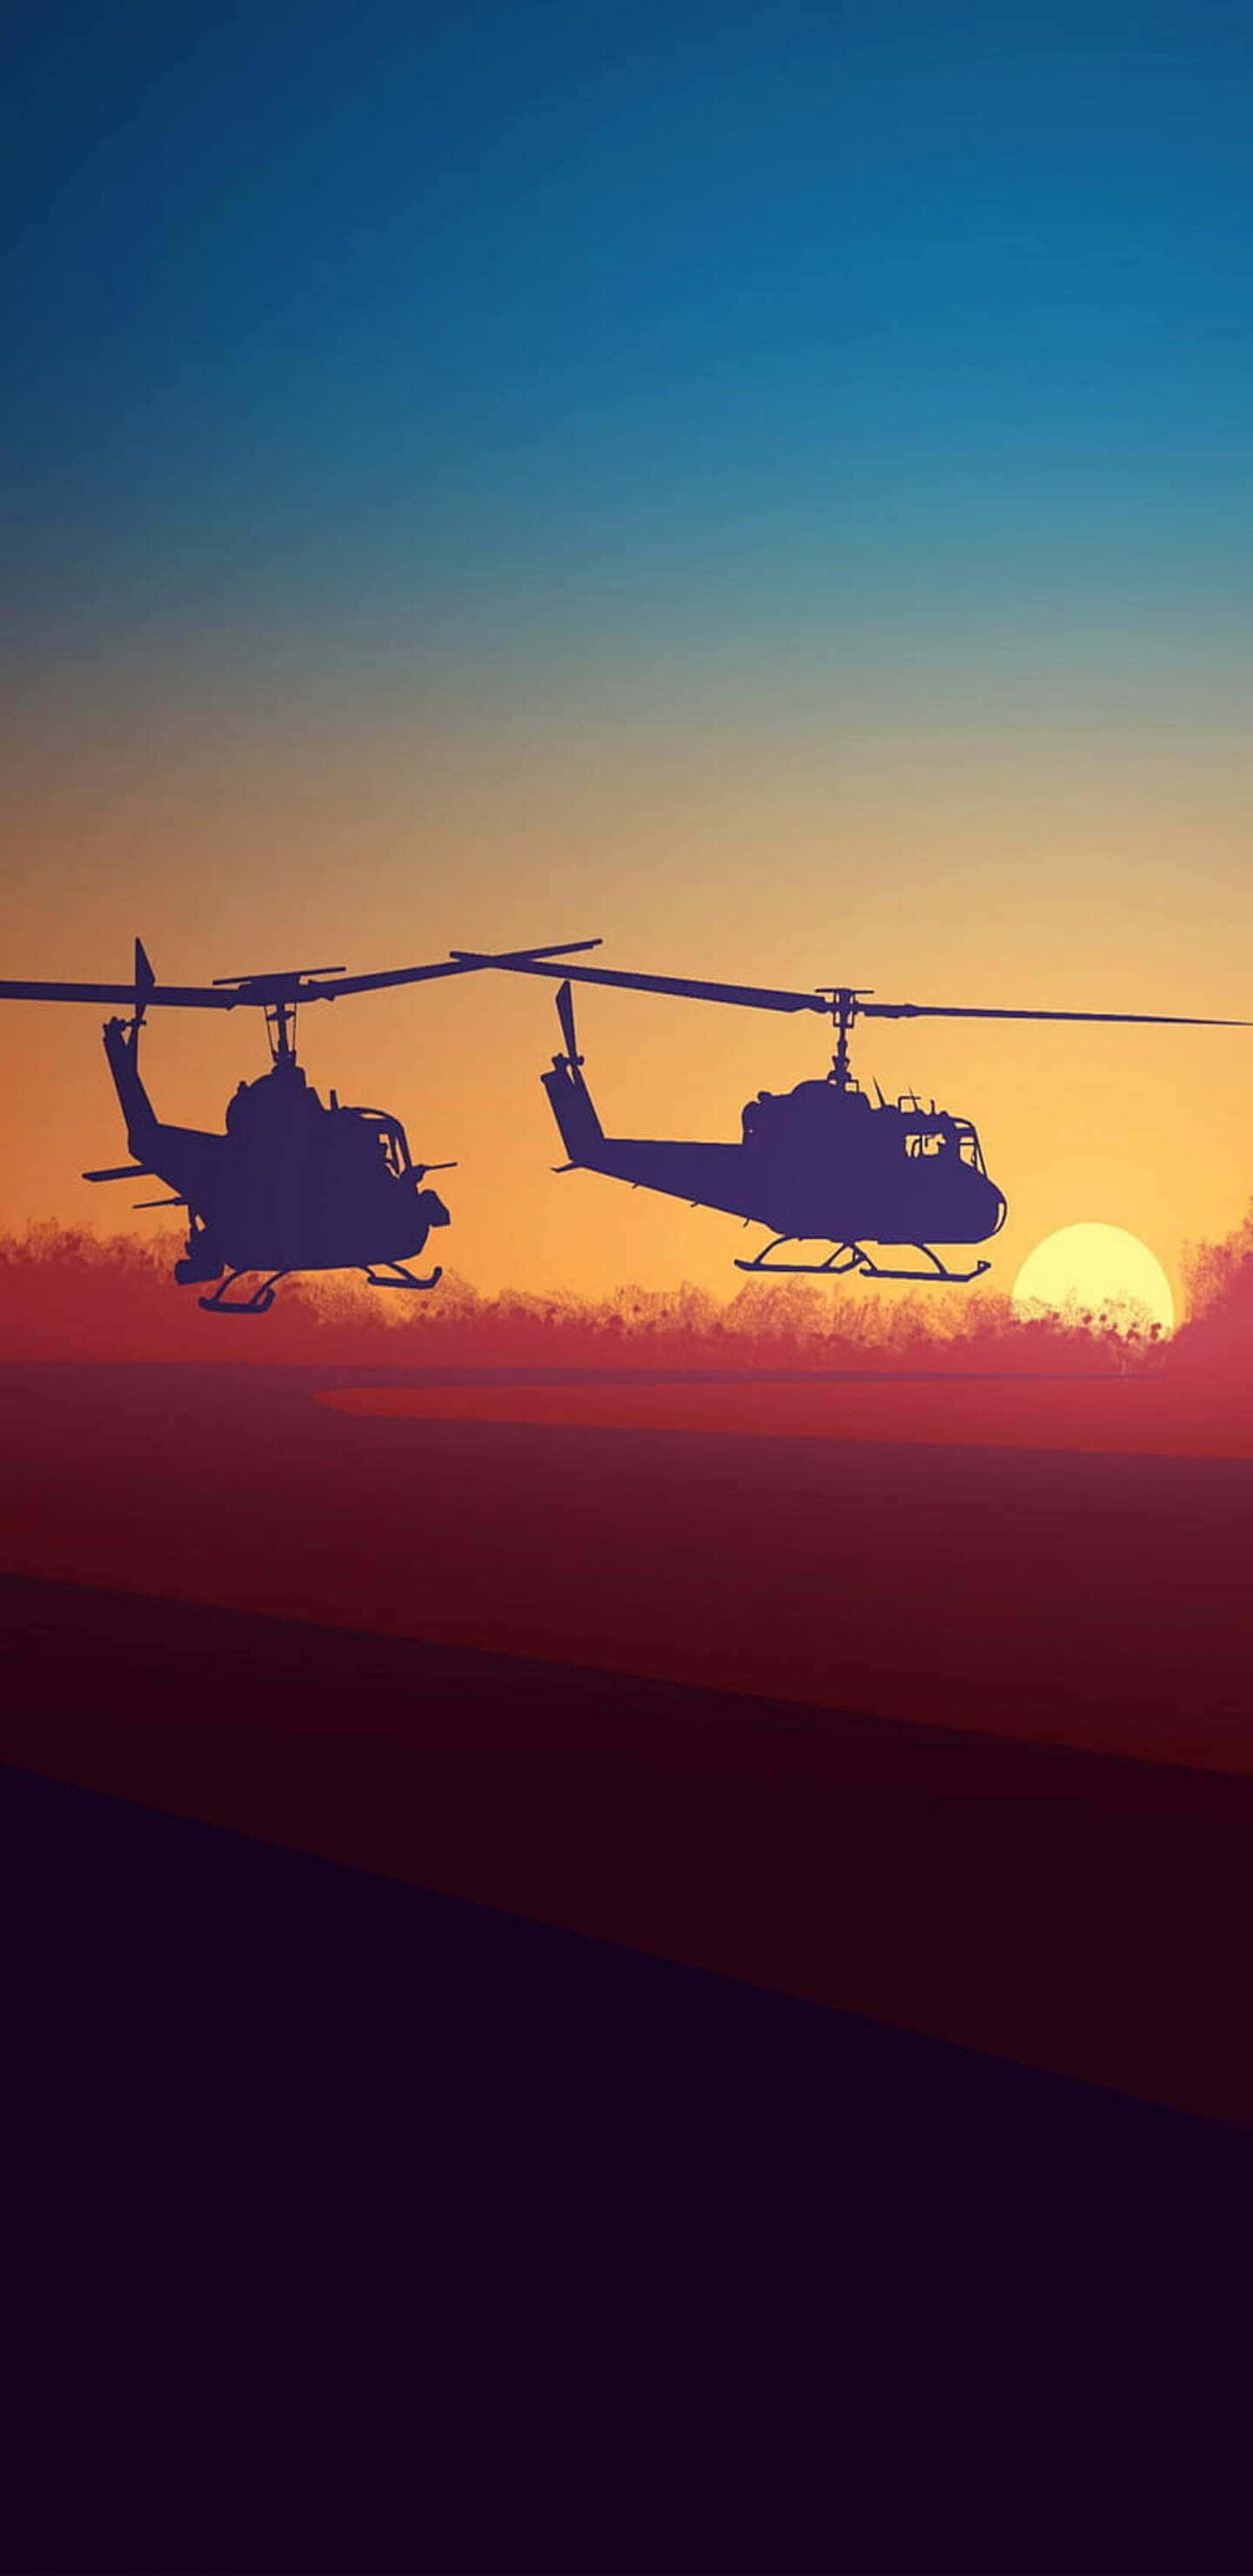 Pixel 3xl Helicopters Background Two Bell UH-1 Iroquois